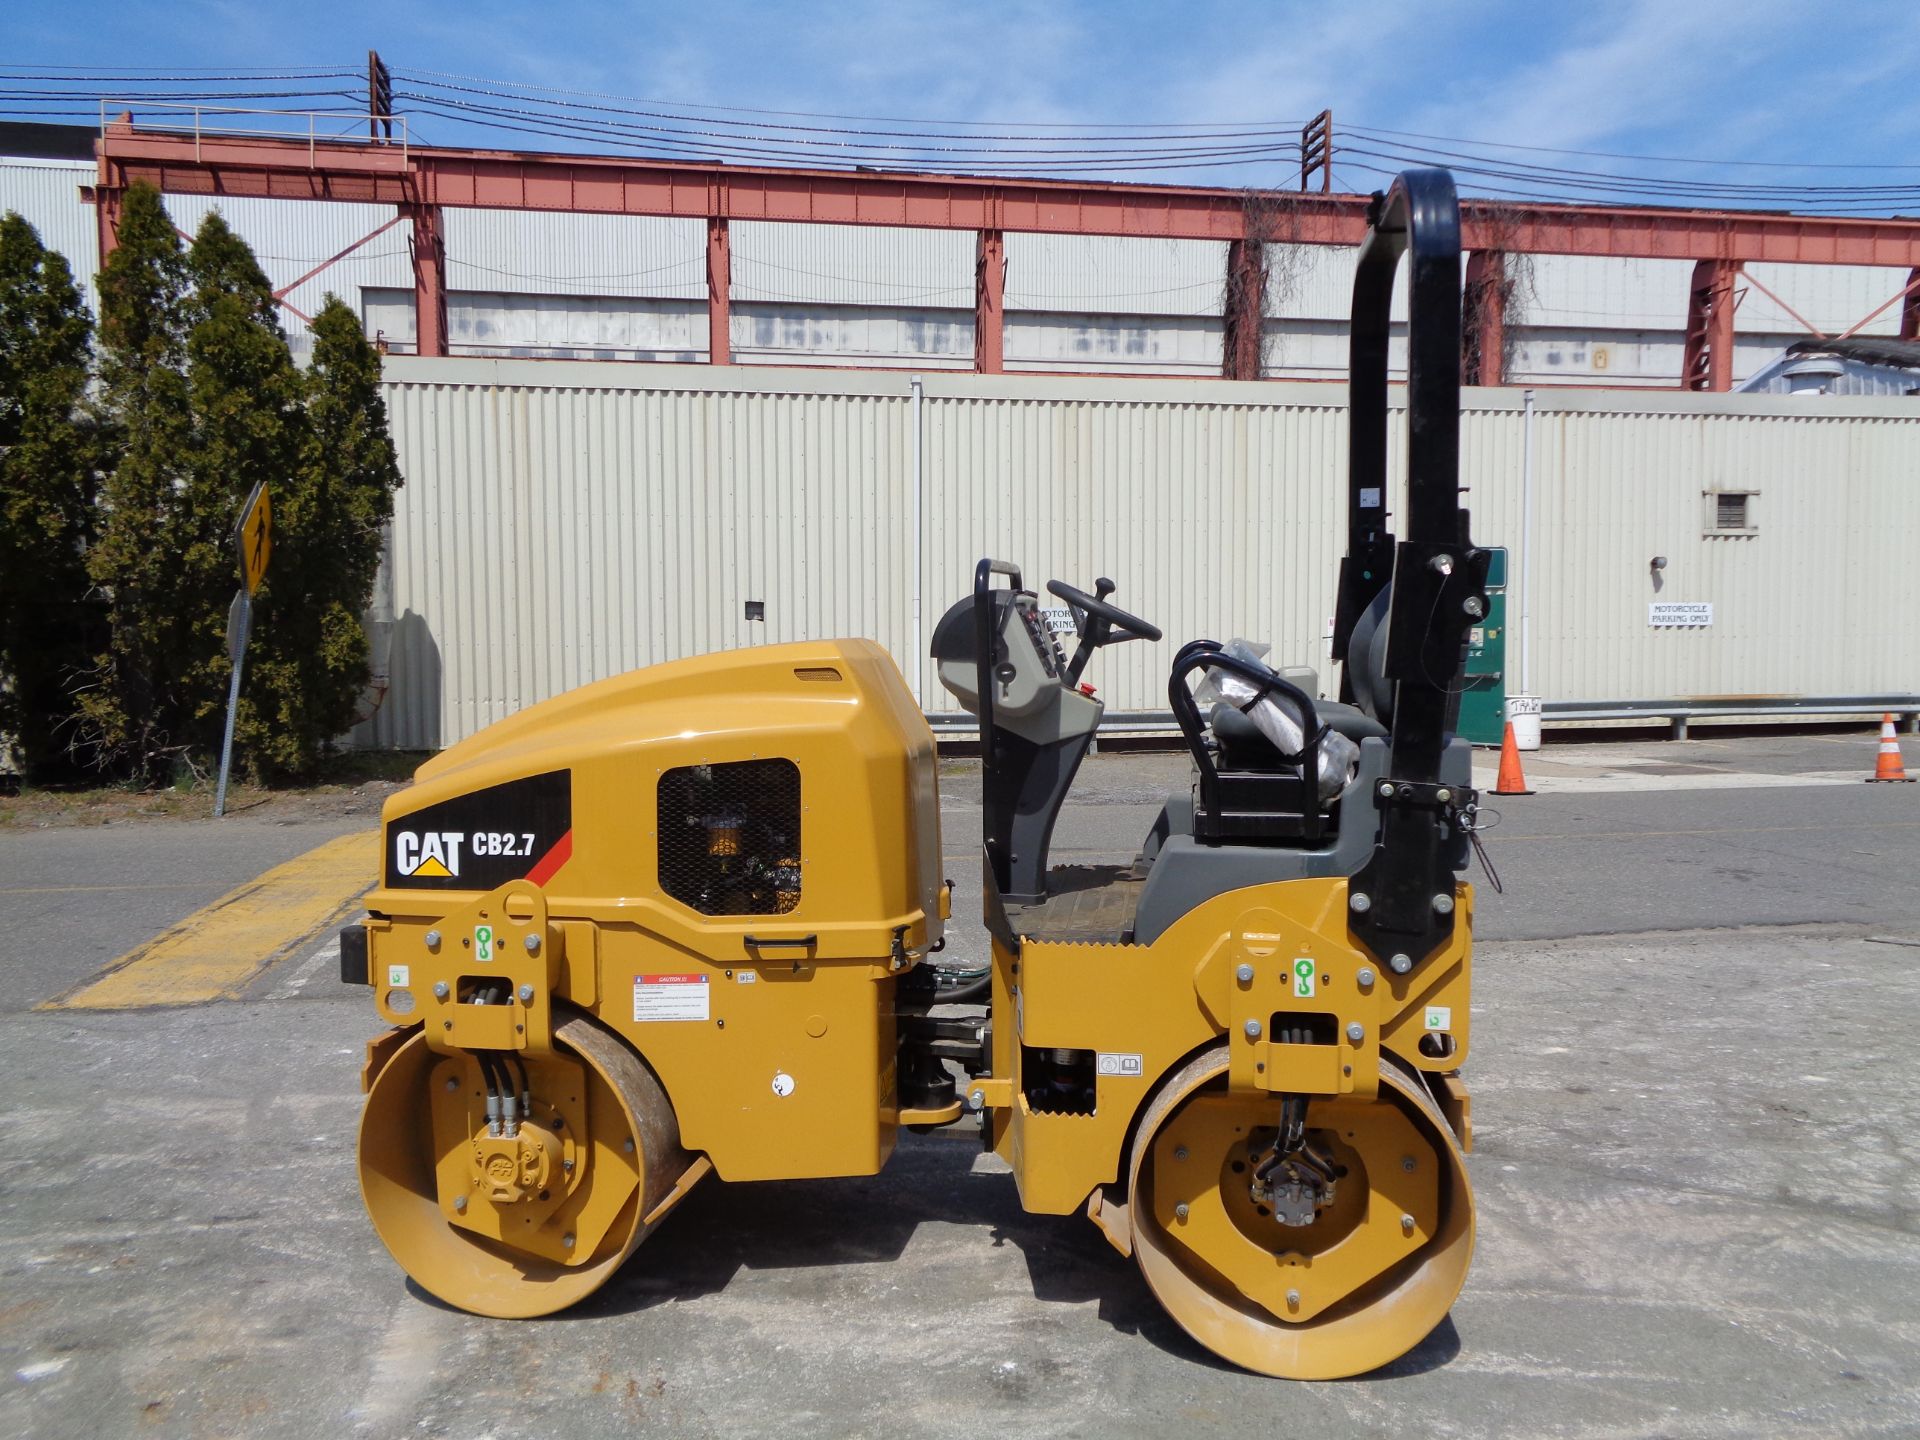 UNUSED New Caterpillar CB2.7 Double Drum Vibrating Roller Compactor - Only 2 Hrs